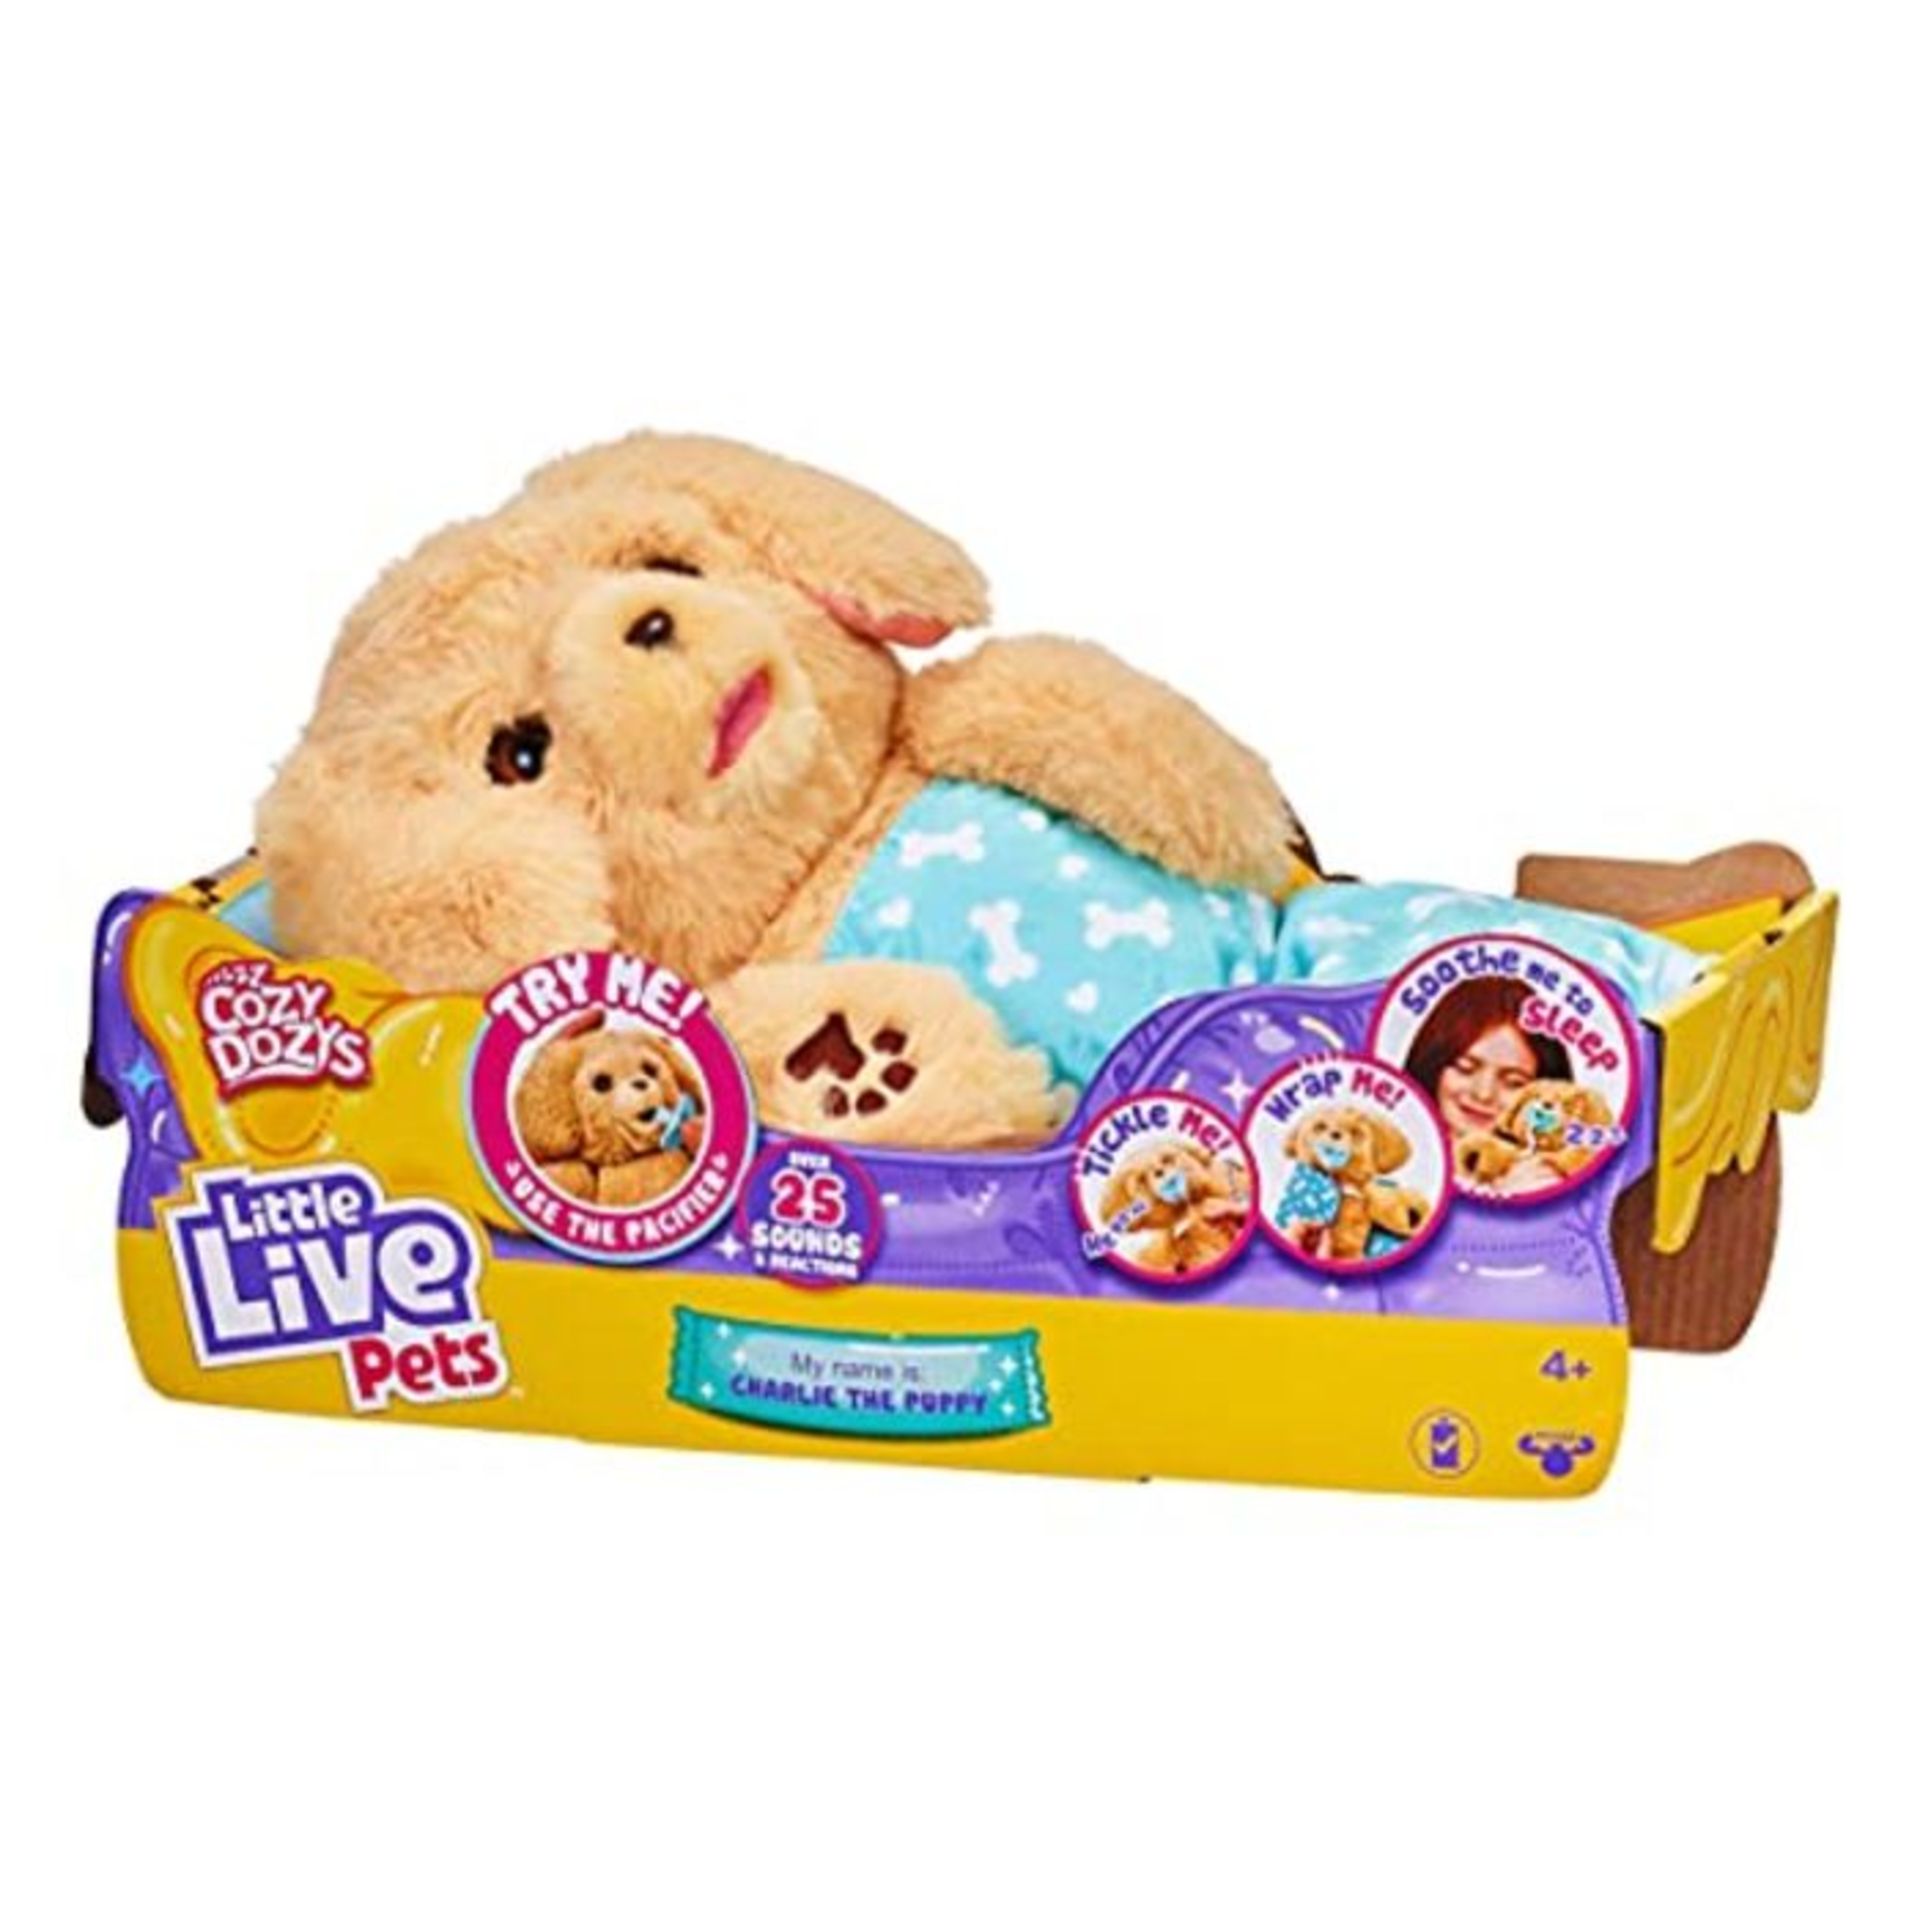 Little Live Pets 26387 Charlie Cozy Dozys Puppy Interactive Cuddly Dog Toy with Sounds